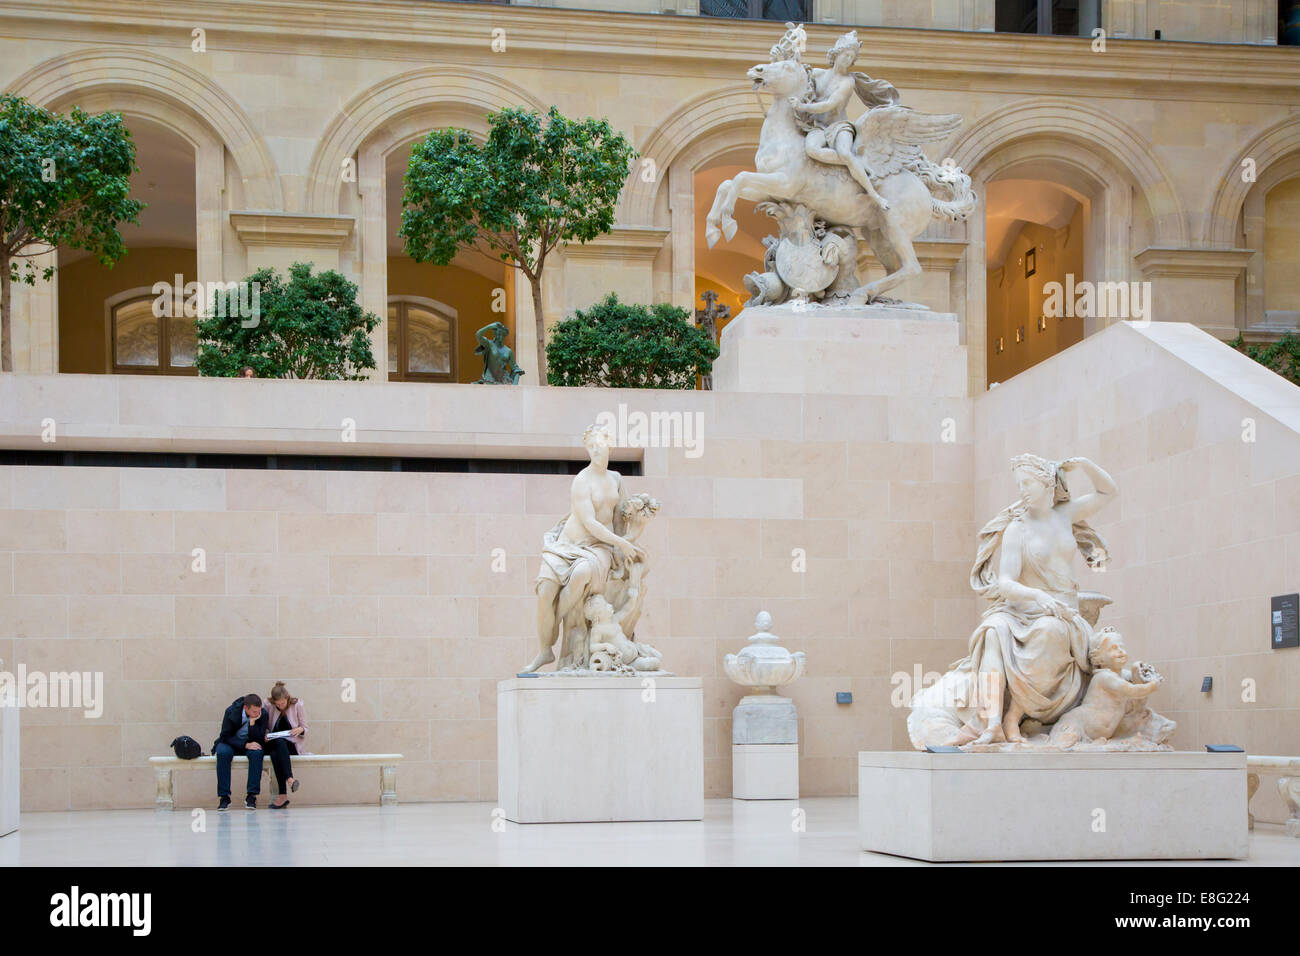 Man and woman on bench in the Richelieu section of Musee du Louvre, Paris, France Stock Photo